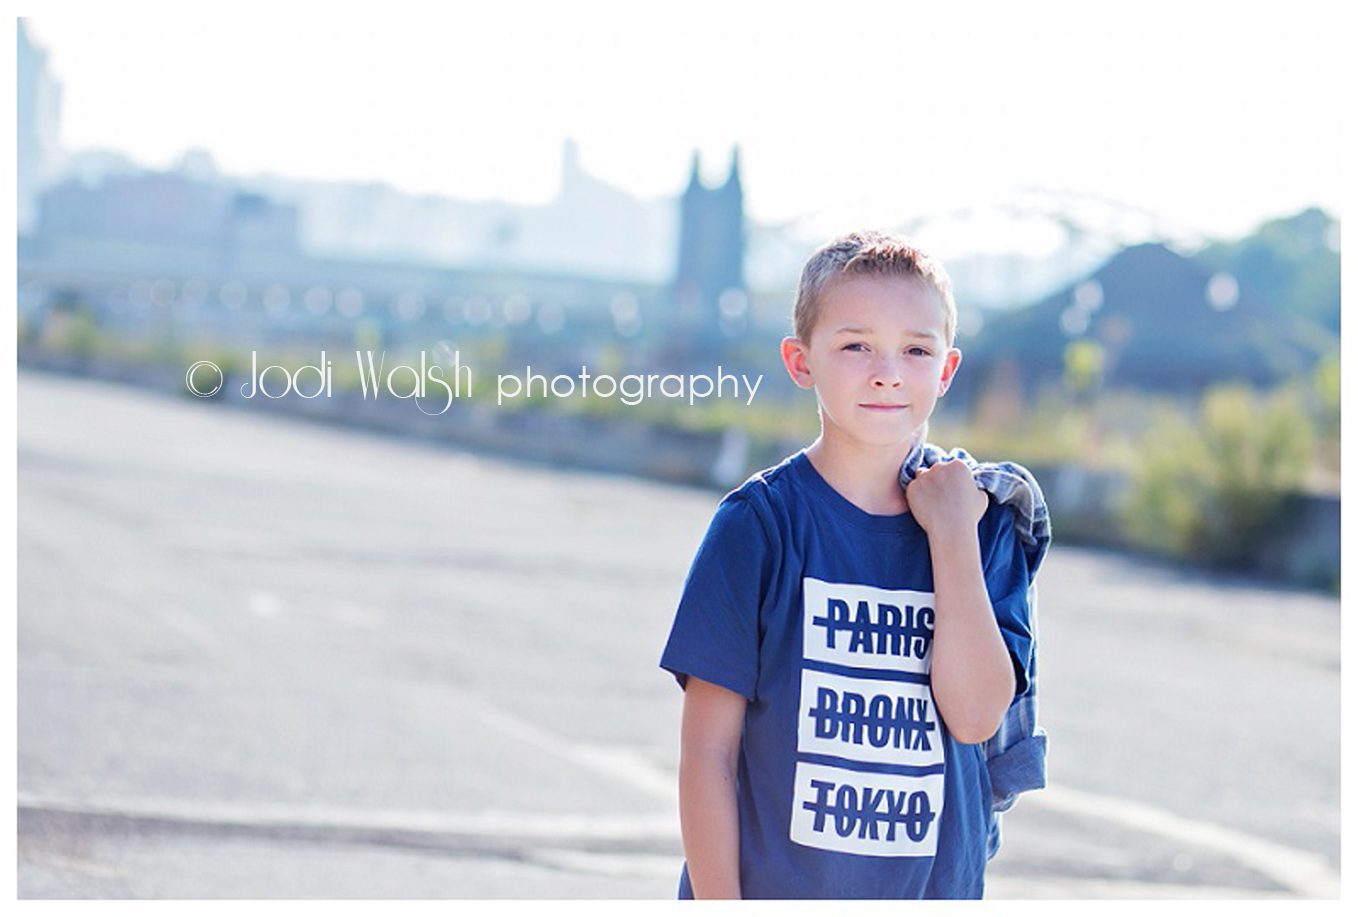 image of a boy wearing a dark blue t-shirt with the words Paris, Bronx, Tokyo in white and holding jacket over his shoulder.  The Pittsburgh city skyline is hazy in the background.